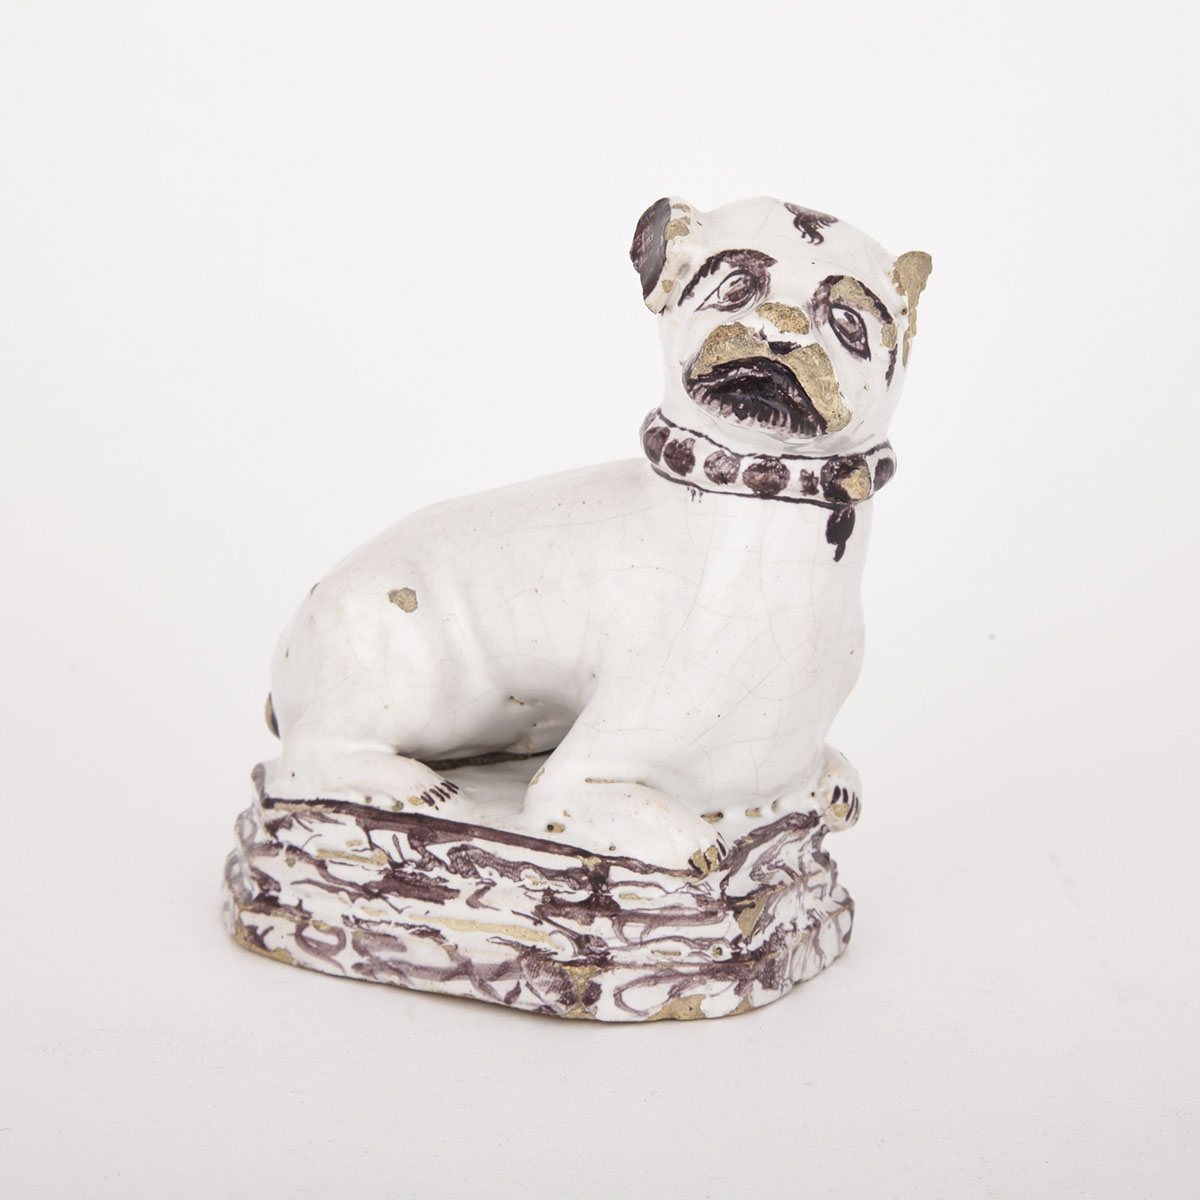 Continental Faience Figure of a Dog, 19th century or earlier